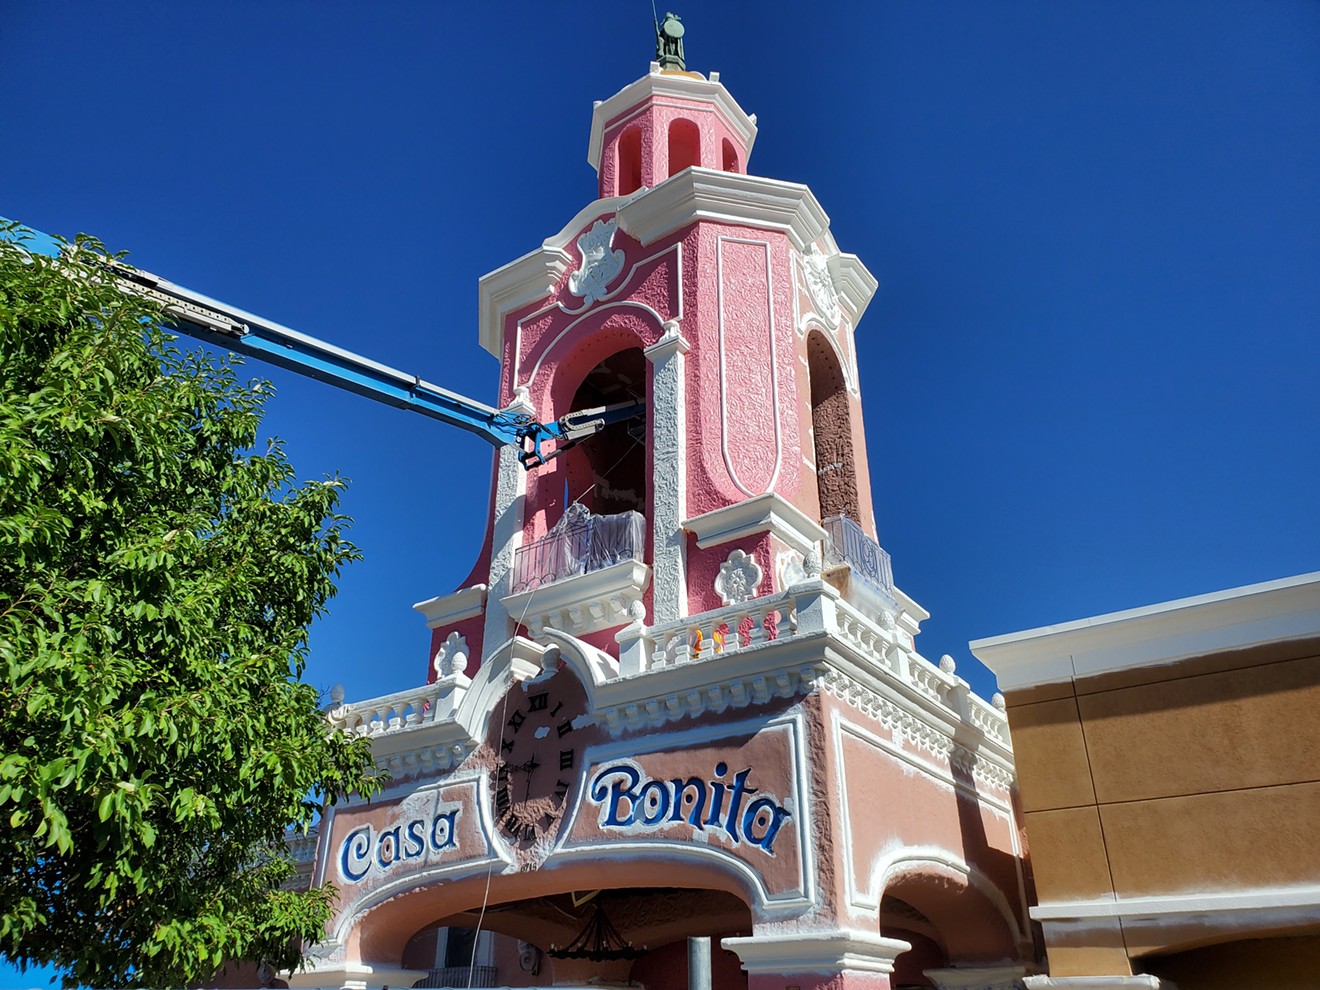 Casa Bonita will reopen in May, with a new paint job outside and in.